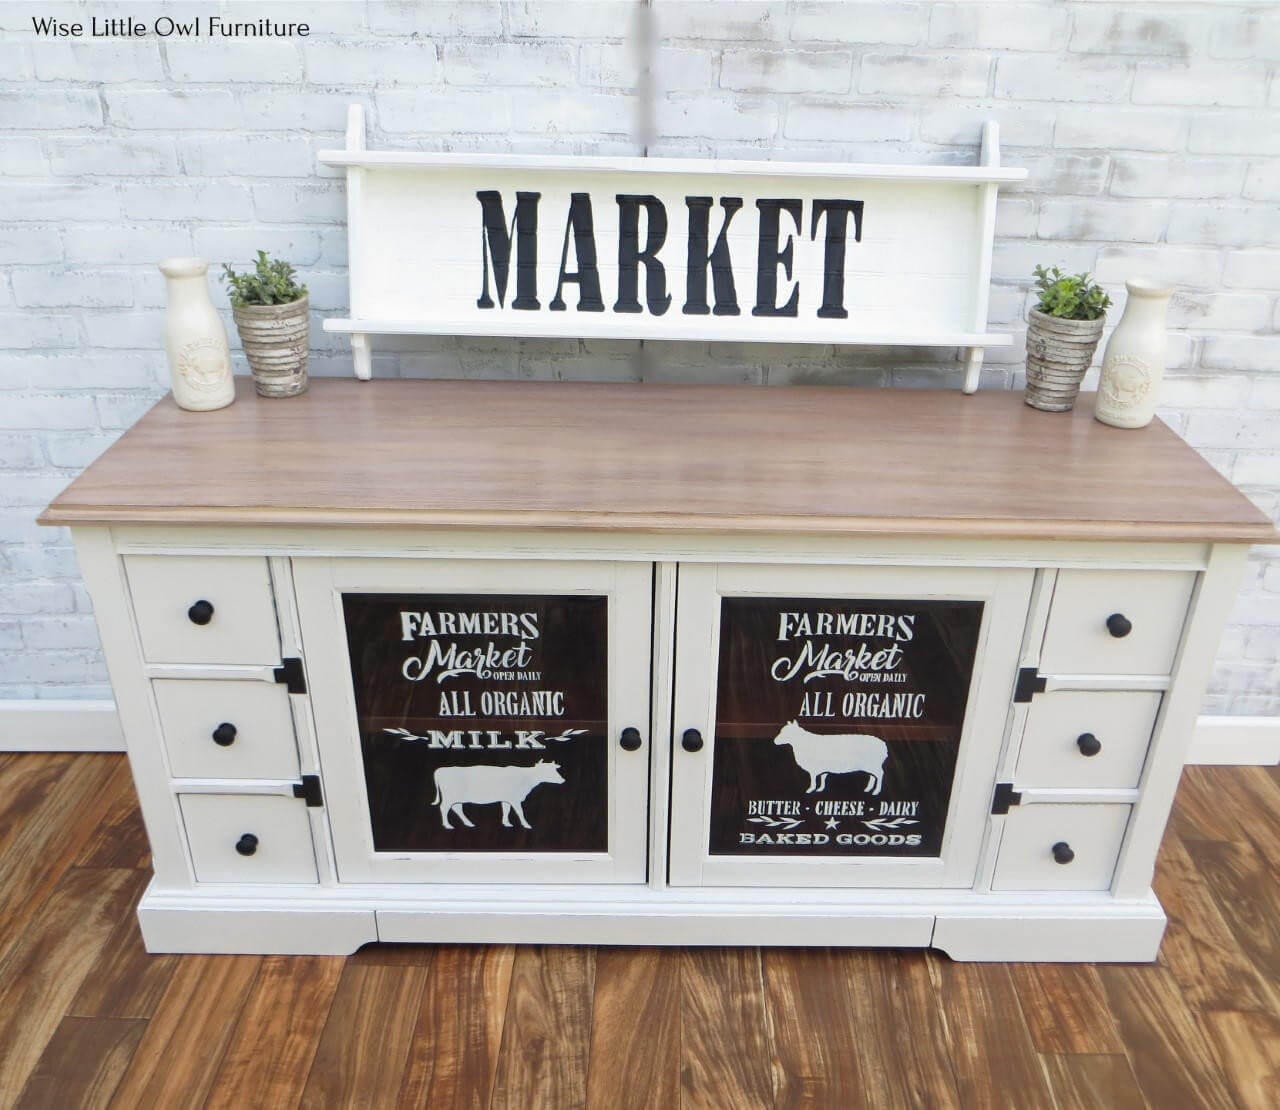 How To Paint Wash Furniture using Black Chalk Mineral Paint 